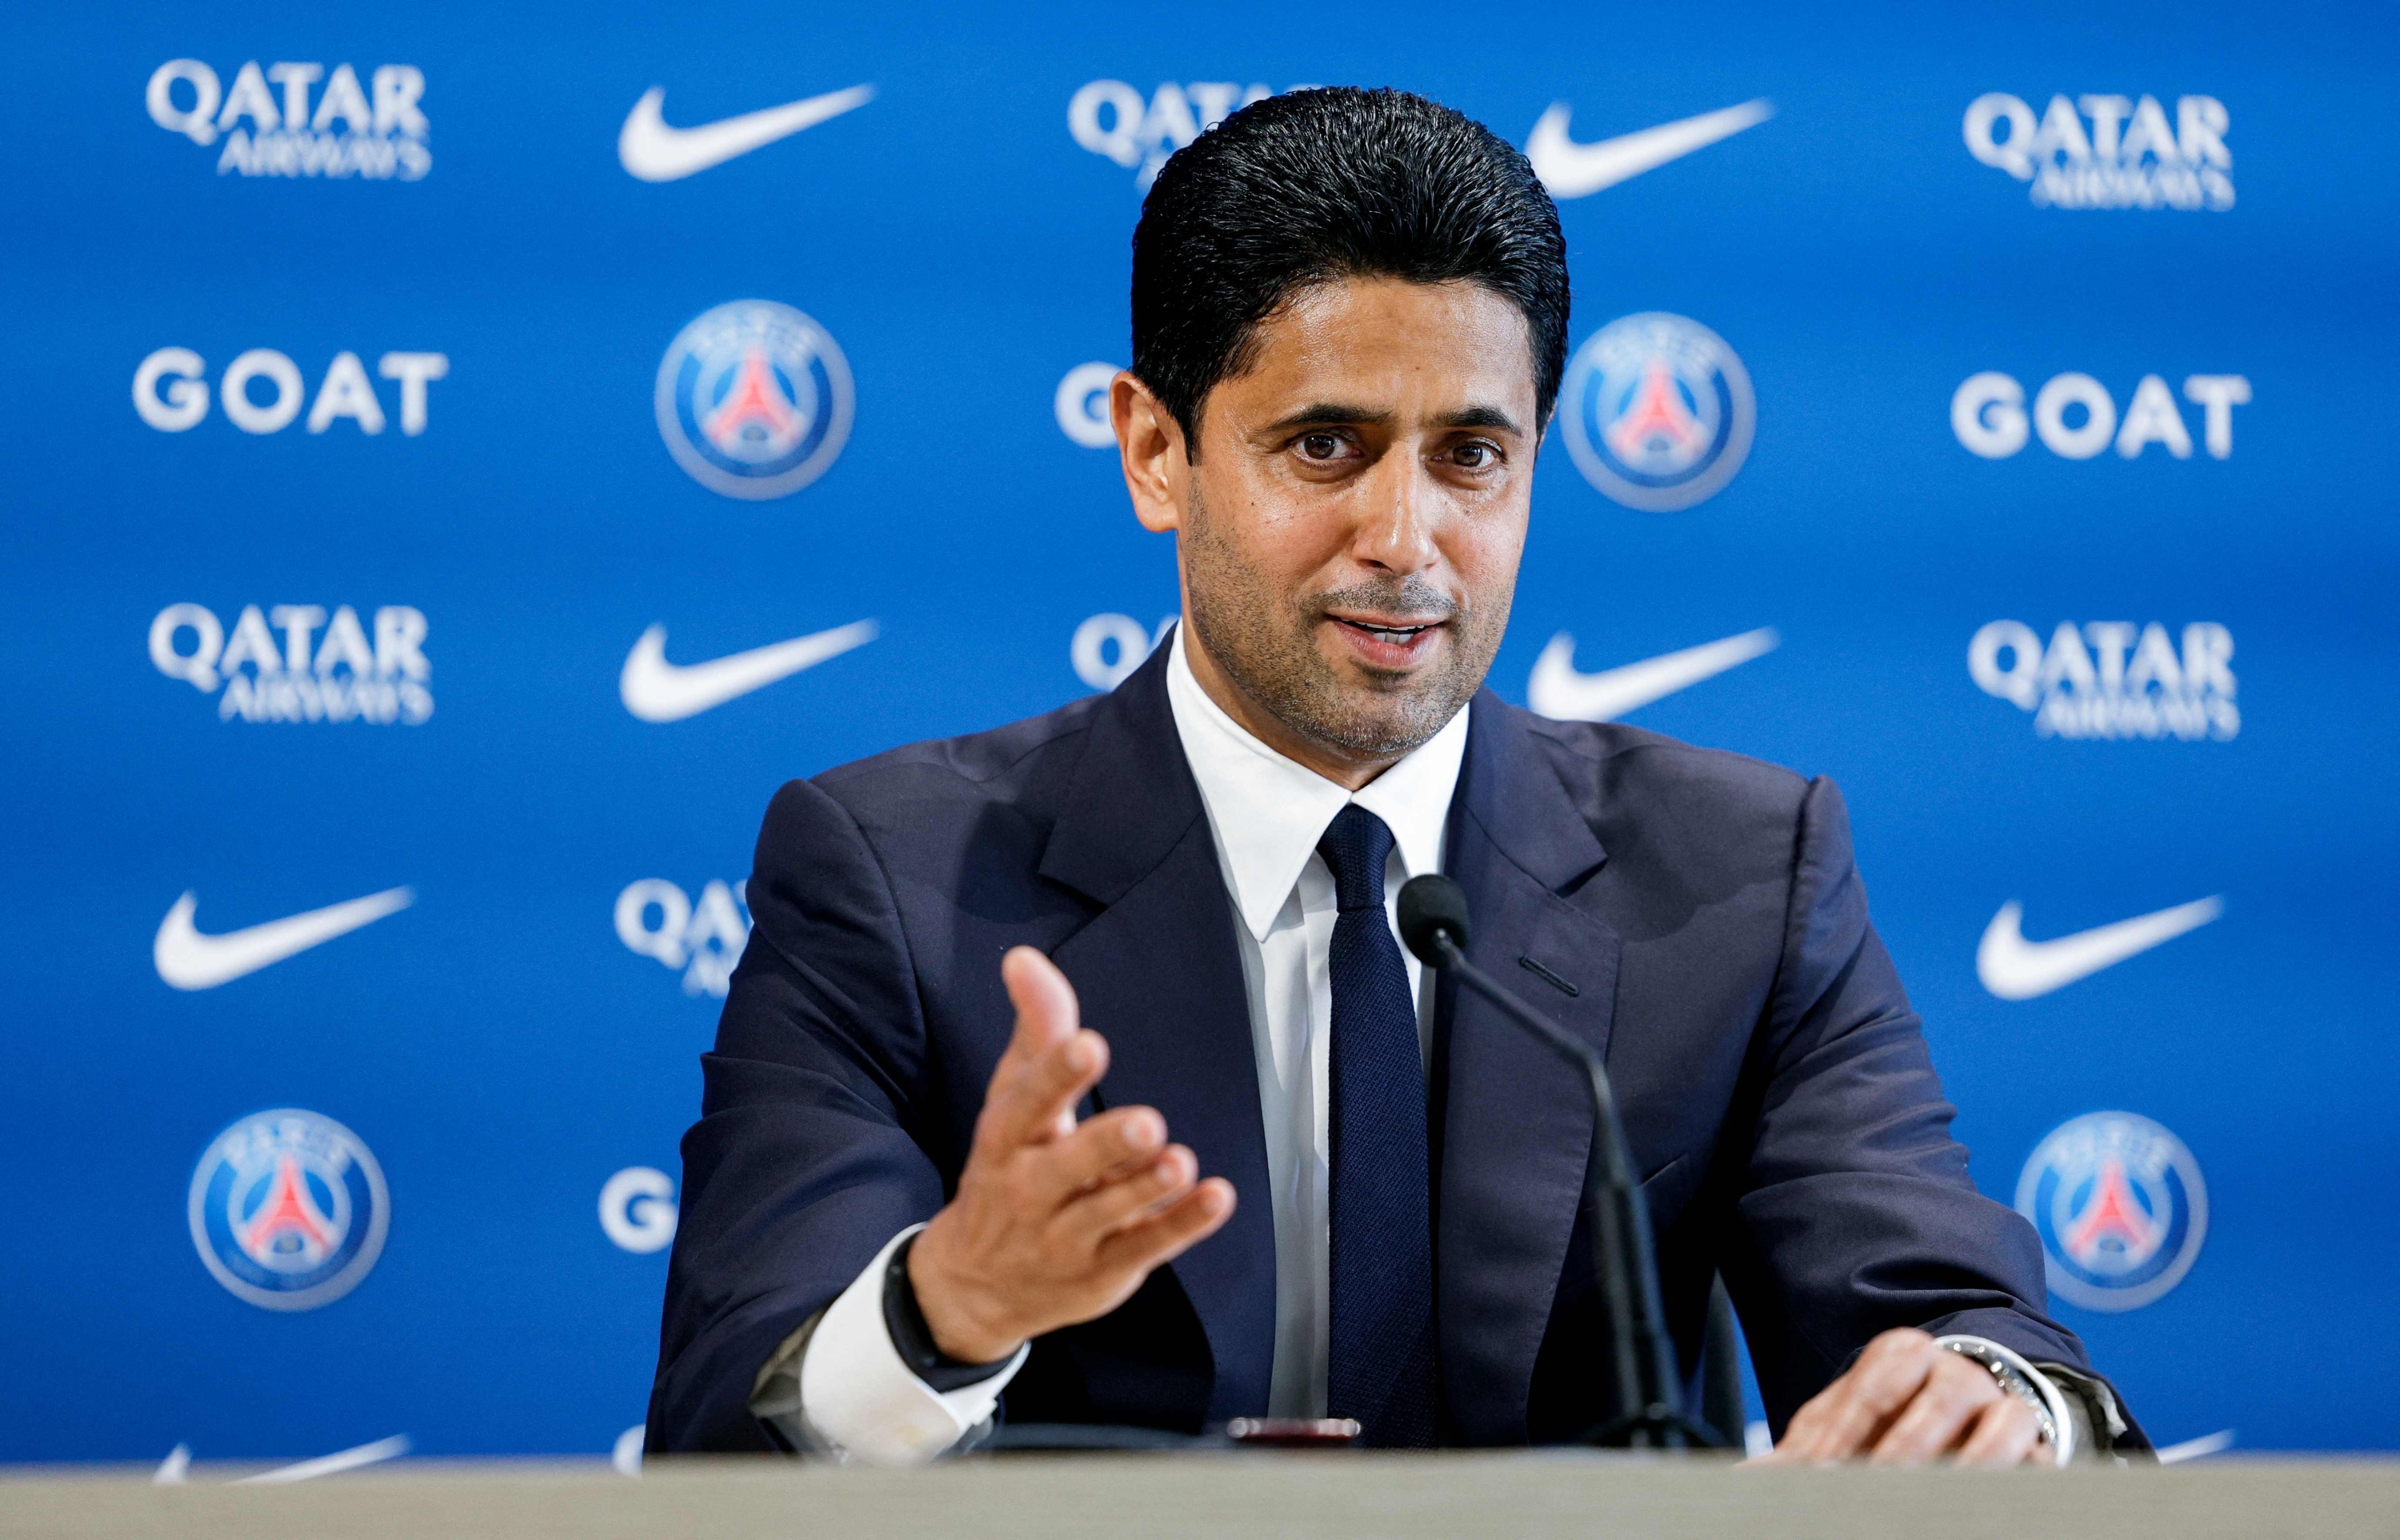 Paris Saint Germain's Qatari president Nasser al-Khelaifi speaks during a press conference to announce the presentation of the new coach, at the new 'campus' of French L1 Paris Saint-Germain (PSG) football club at Poissy, west of Paris on July 5, 2023. Former Barcelona and Spain coach Luis Enrique has been appointed as the new coach of Paris Saint-Germain on a two-year deal, the French champions announced on July 5, 2023. (Photo by Geoffroy VAN DER HASSELT / AFP)